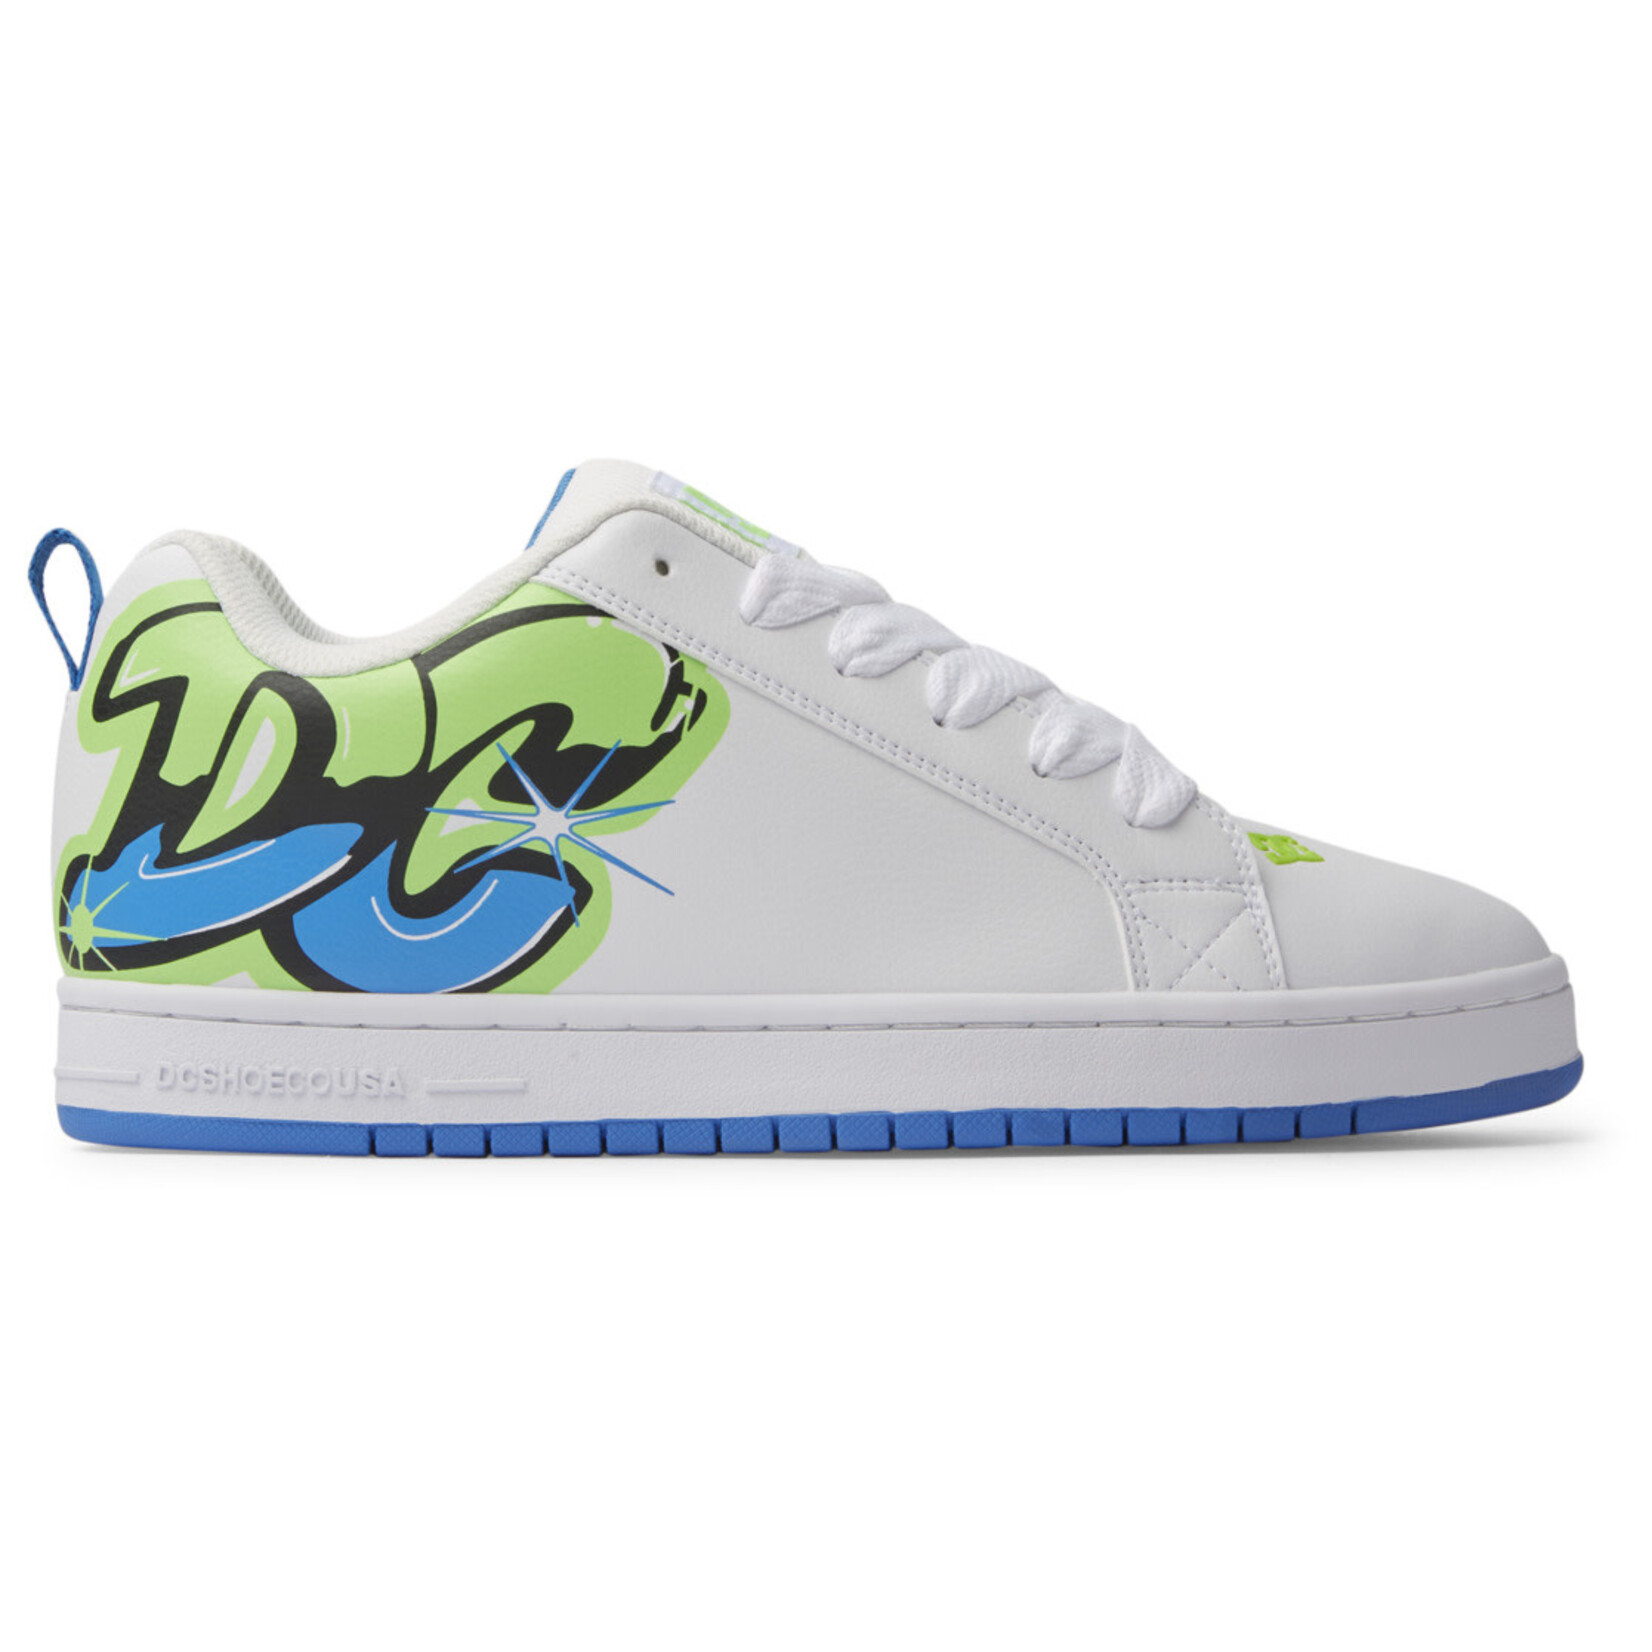 DCSHOES COURT GARFFIK - Chaussures - DC SHOES White/Lime/Turquoise